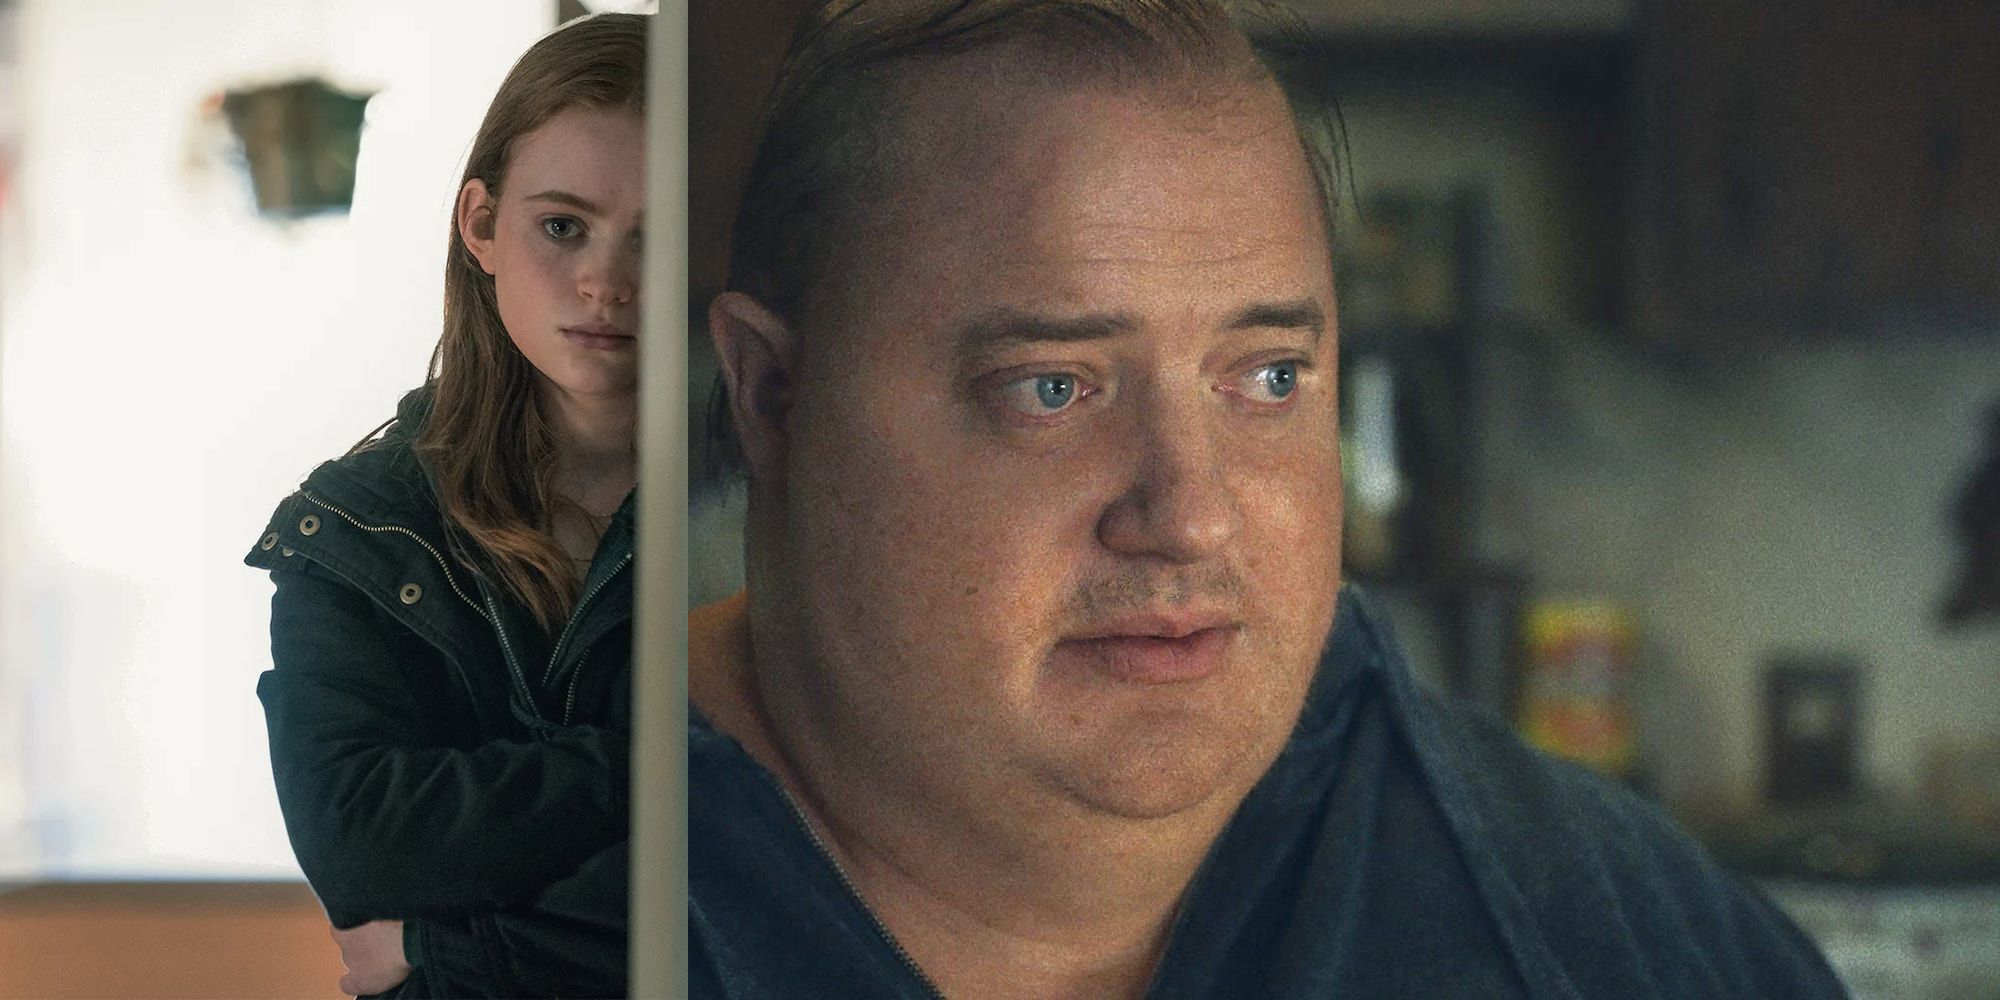 Sadie Sink and Brendan Fraser in The Whale Mashup